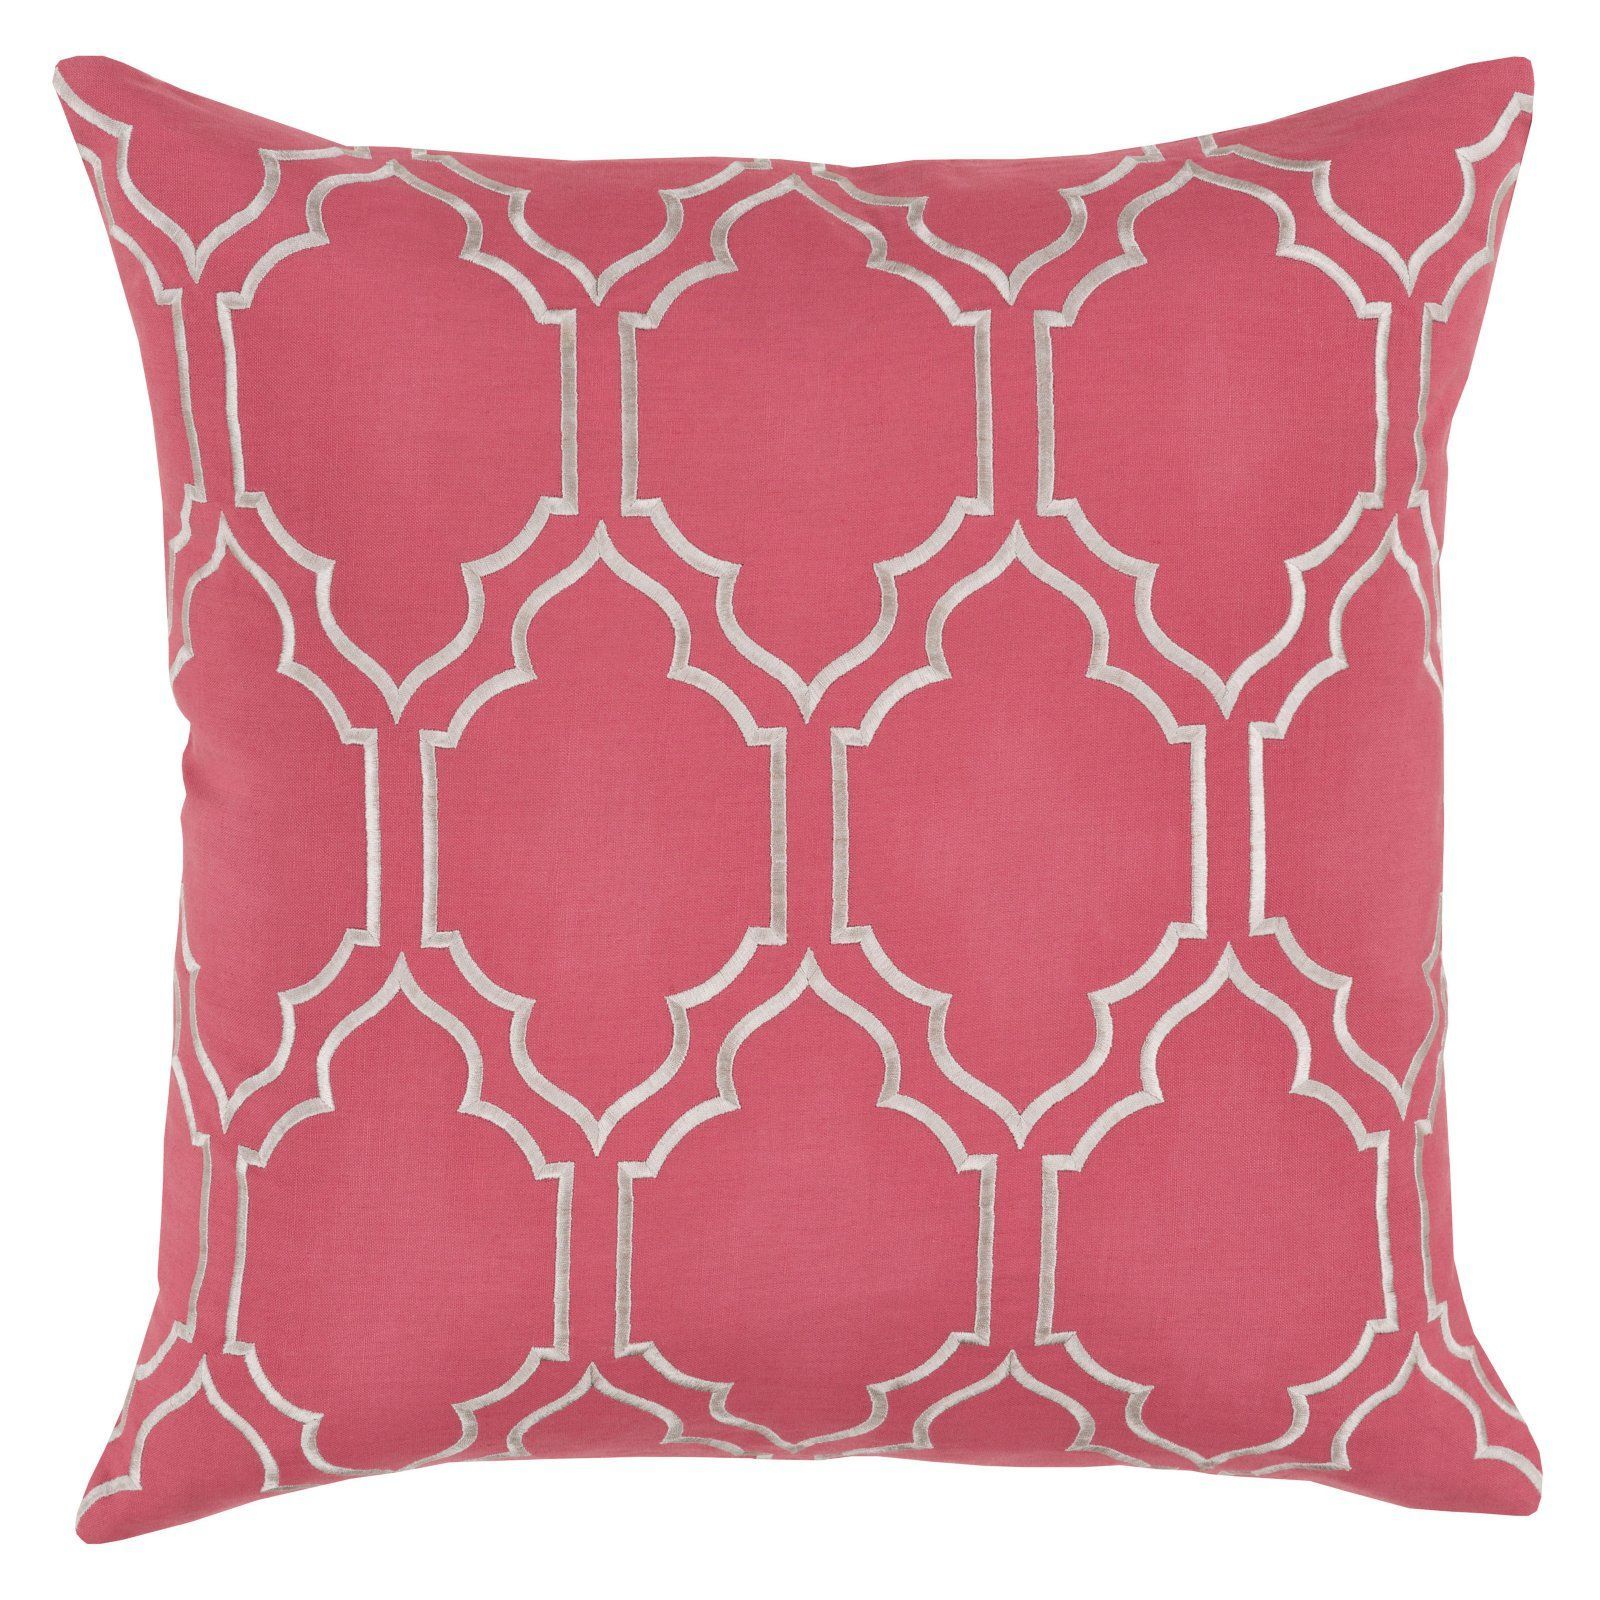 Surya Skyline Vi Decorative Throw Pillow Poly Pink | Throw Pillows Pertaining To Gray And Beige Trellis Cylinder Pouf Ottomans (View 18 of 20)